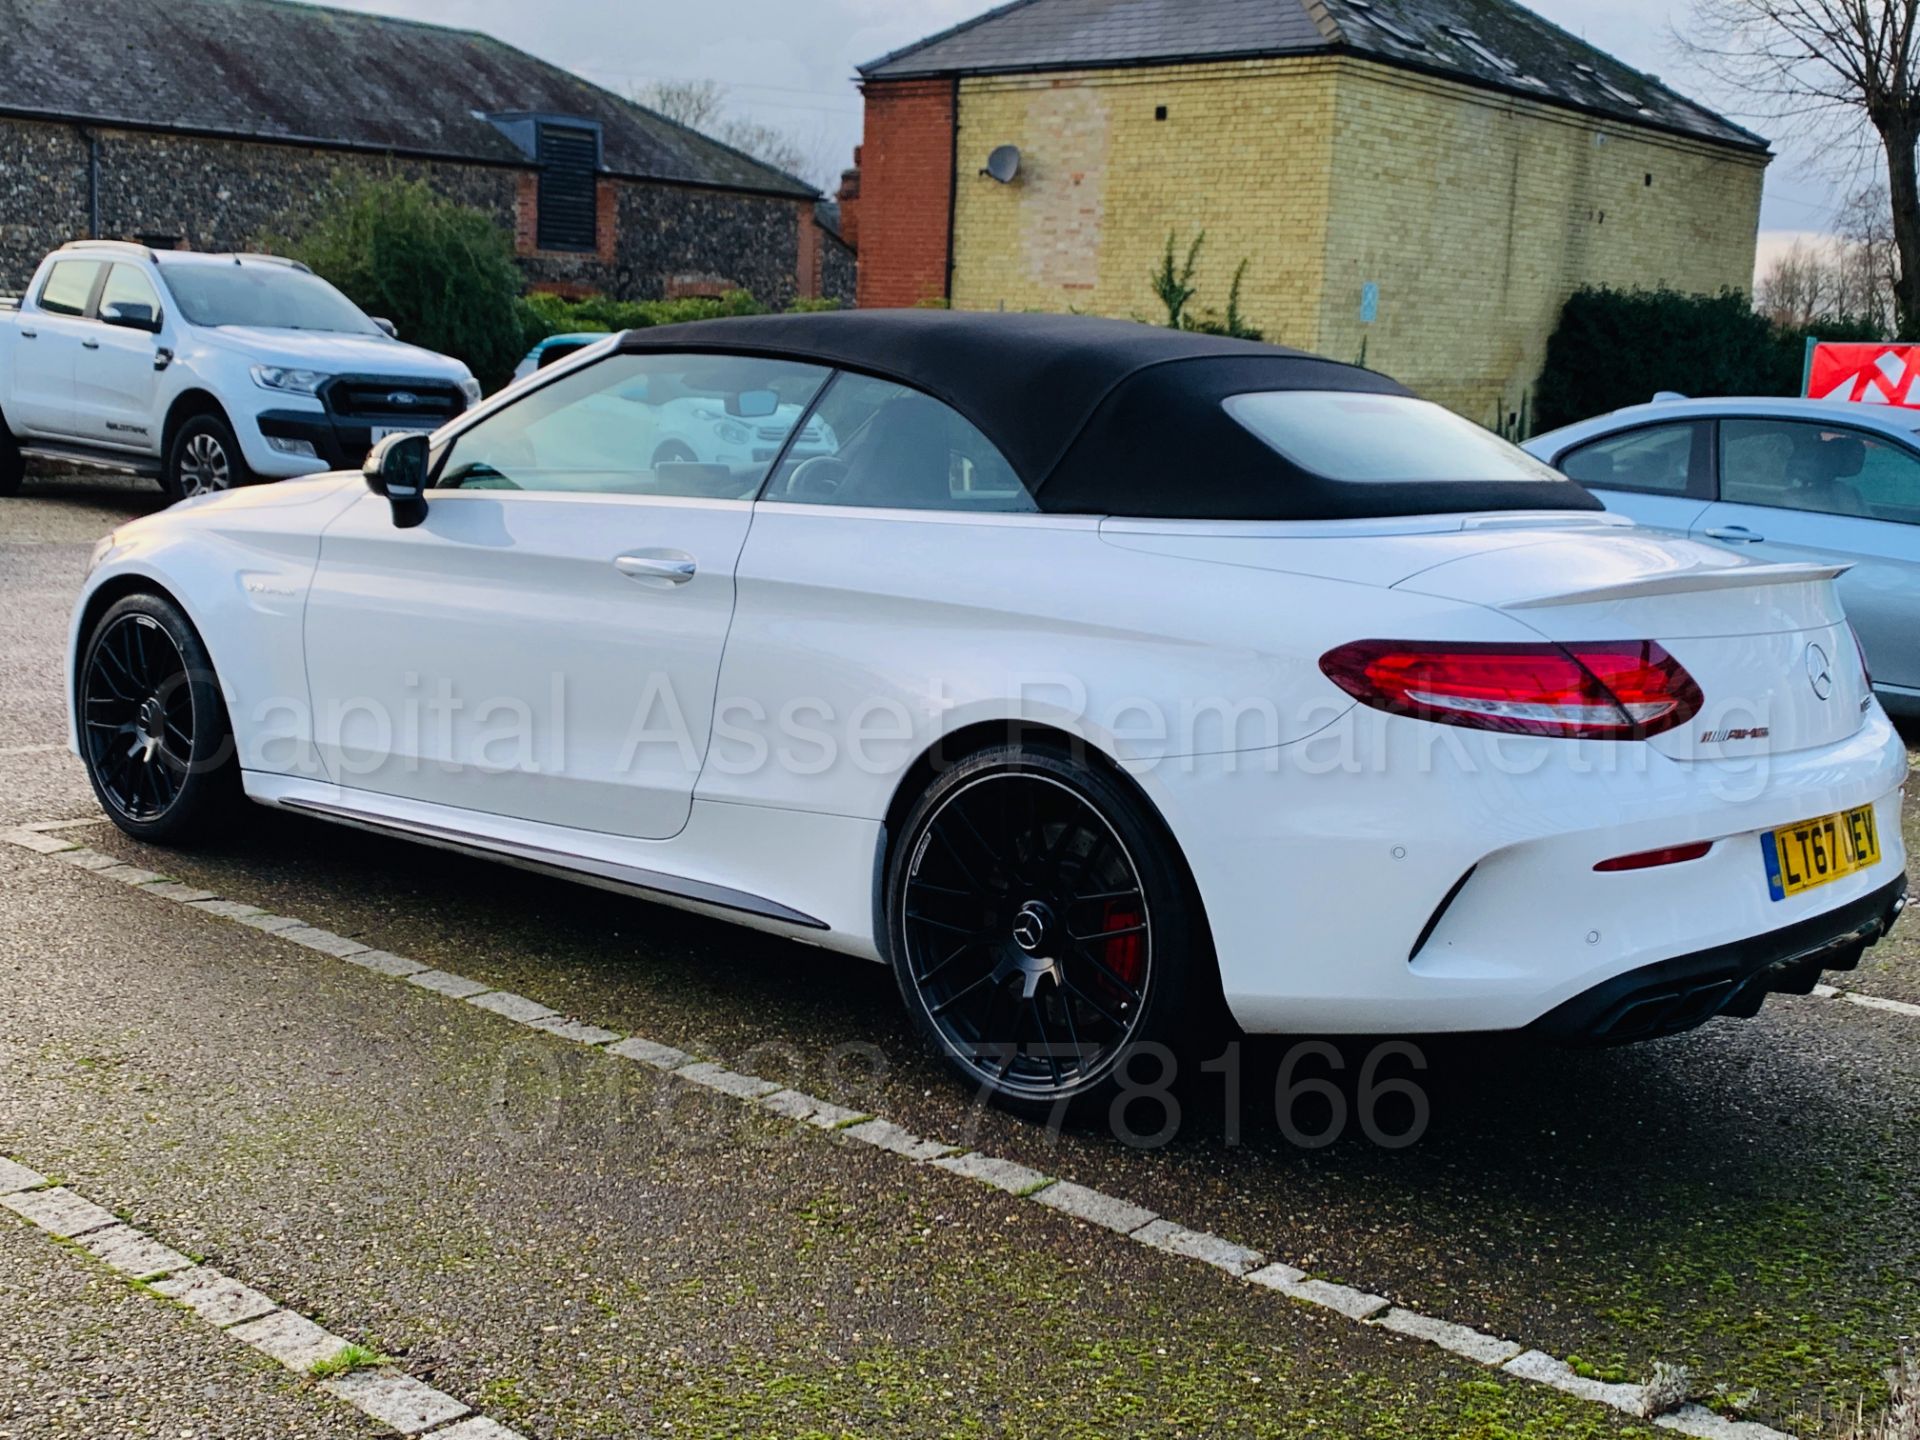 (On Sale) MERCEDES-BENZ AMG C63-S *CABRIOLET* (67 REG) '4.0 BI-TURBO -510 BHP - AUTO' *FULLY LOADED* - Image 16 of 79